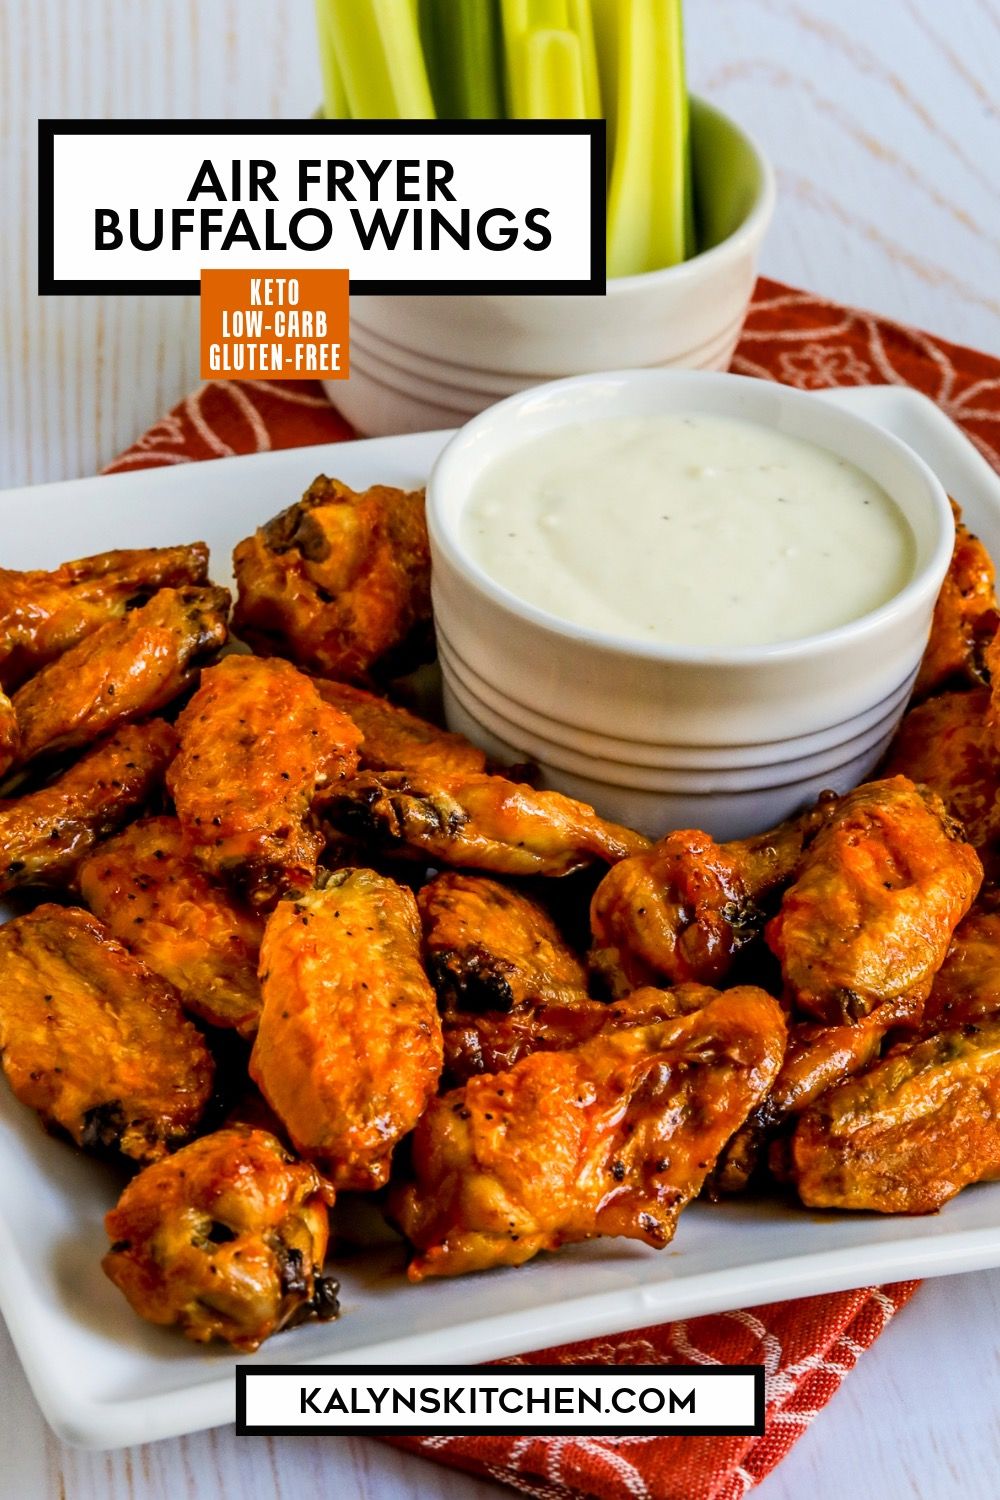 Pinterest image for Air Fryer Buffalo Wings showing wings on serving plate with dip and celery.